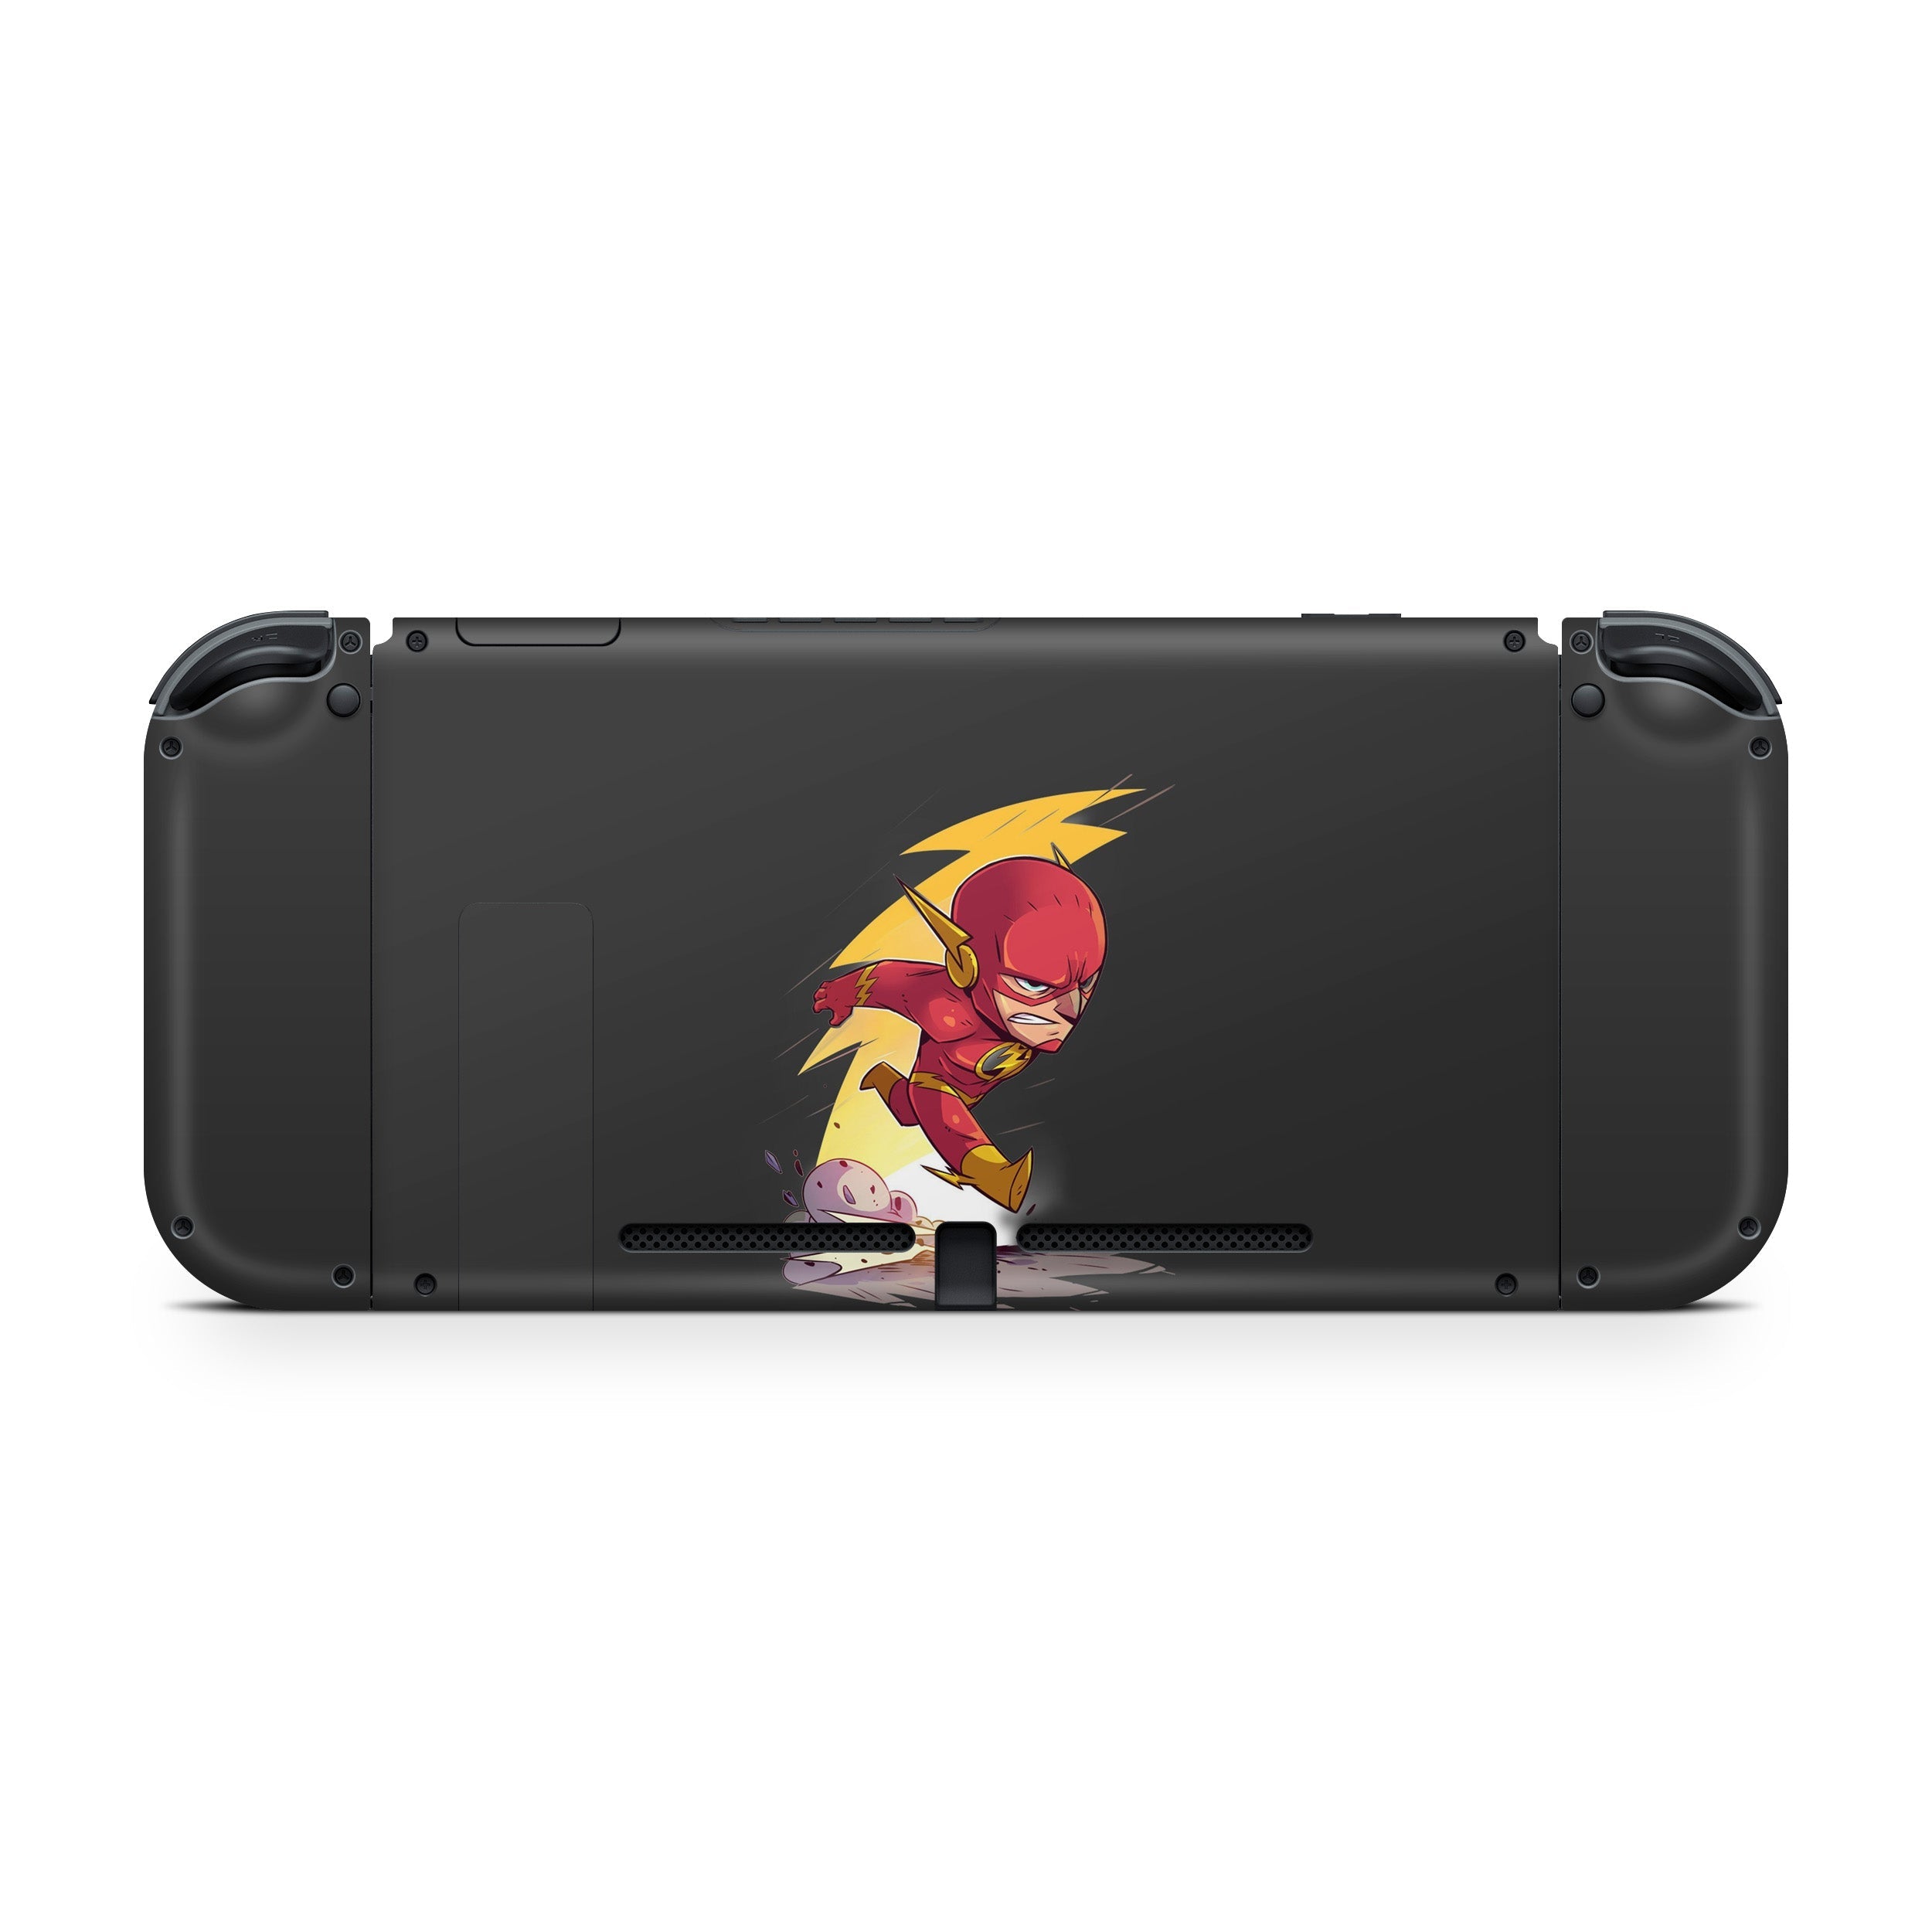 A video game skin featuring a Marvel Flash design for the Nintendo Switch.